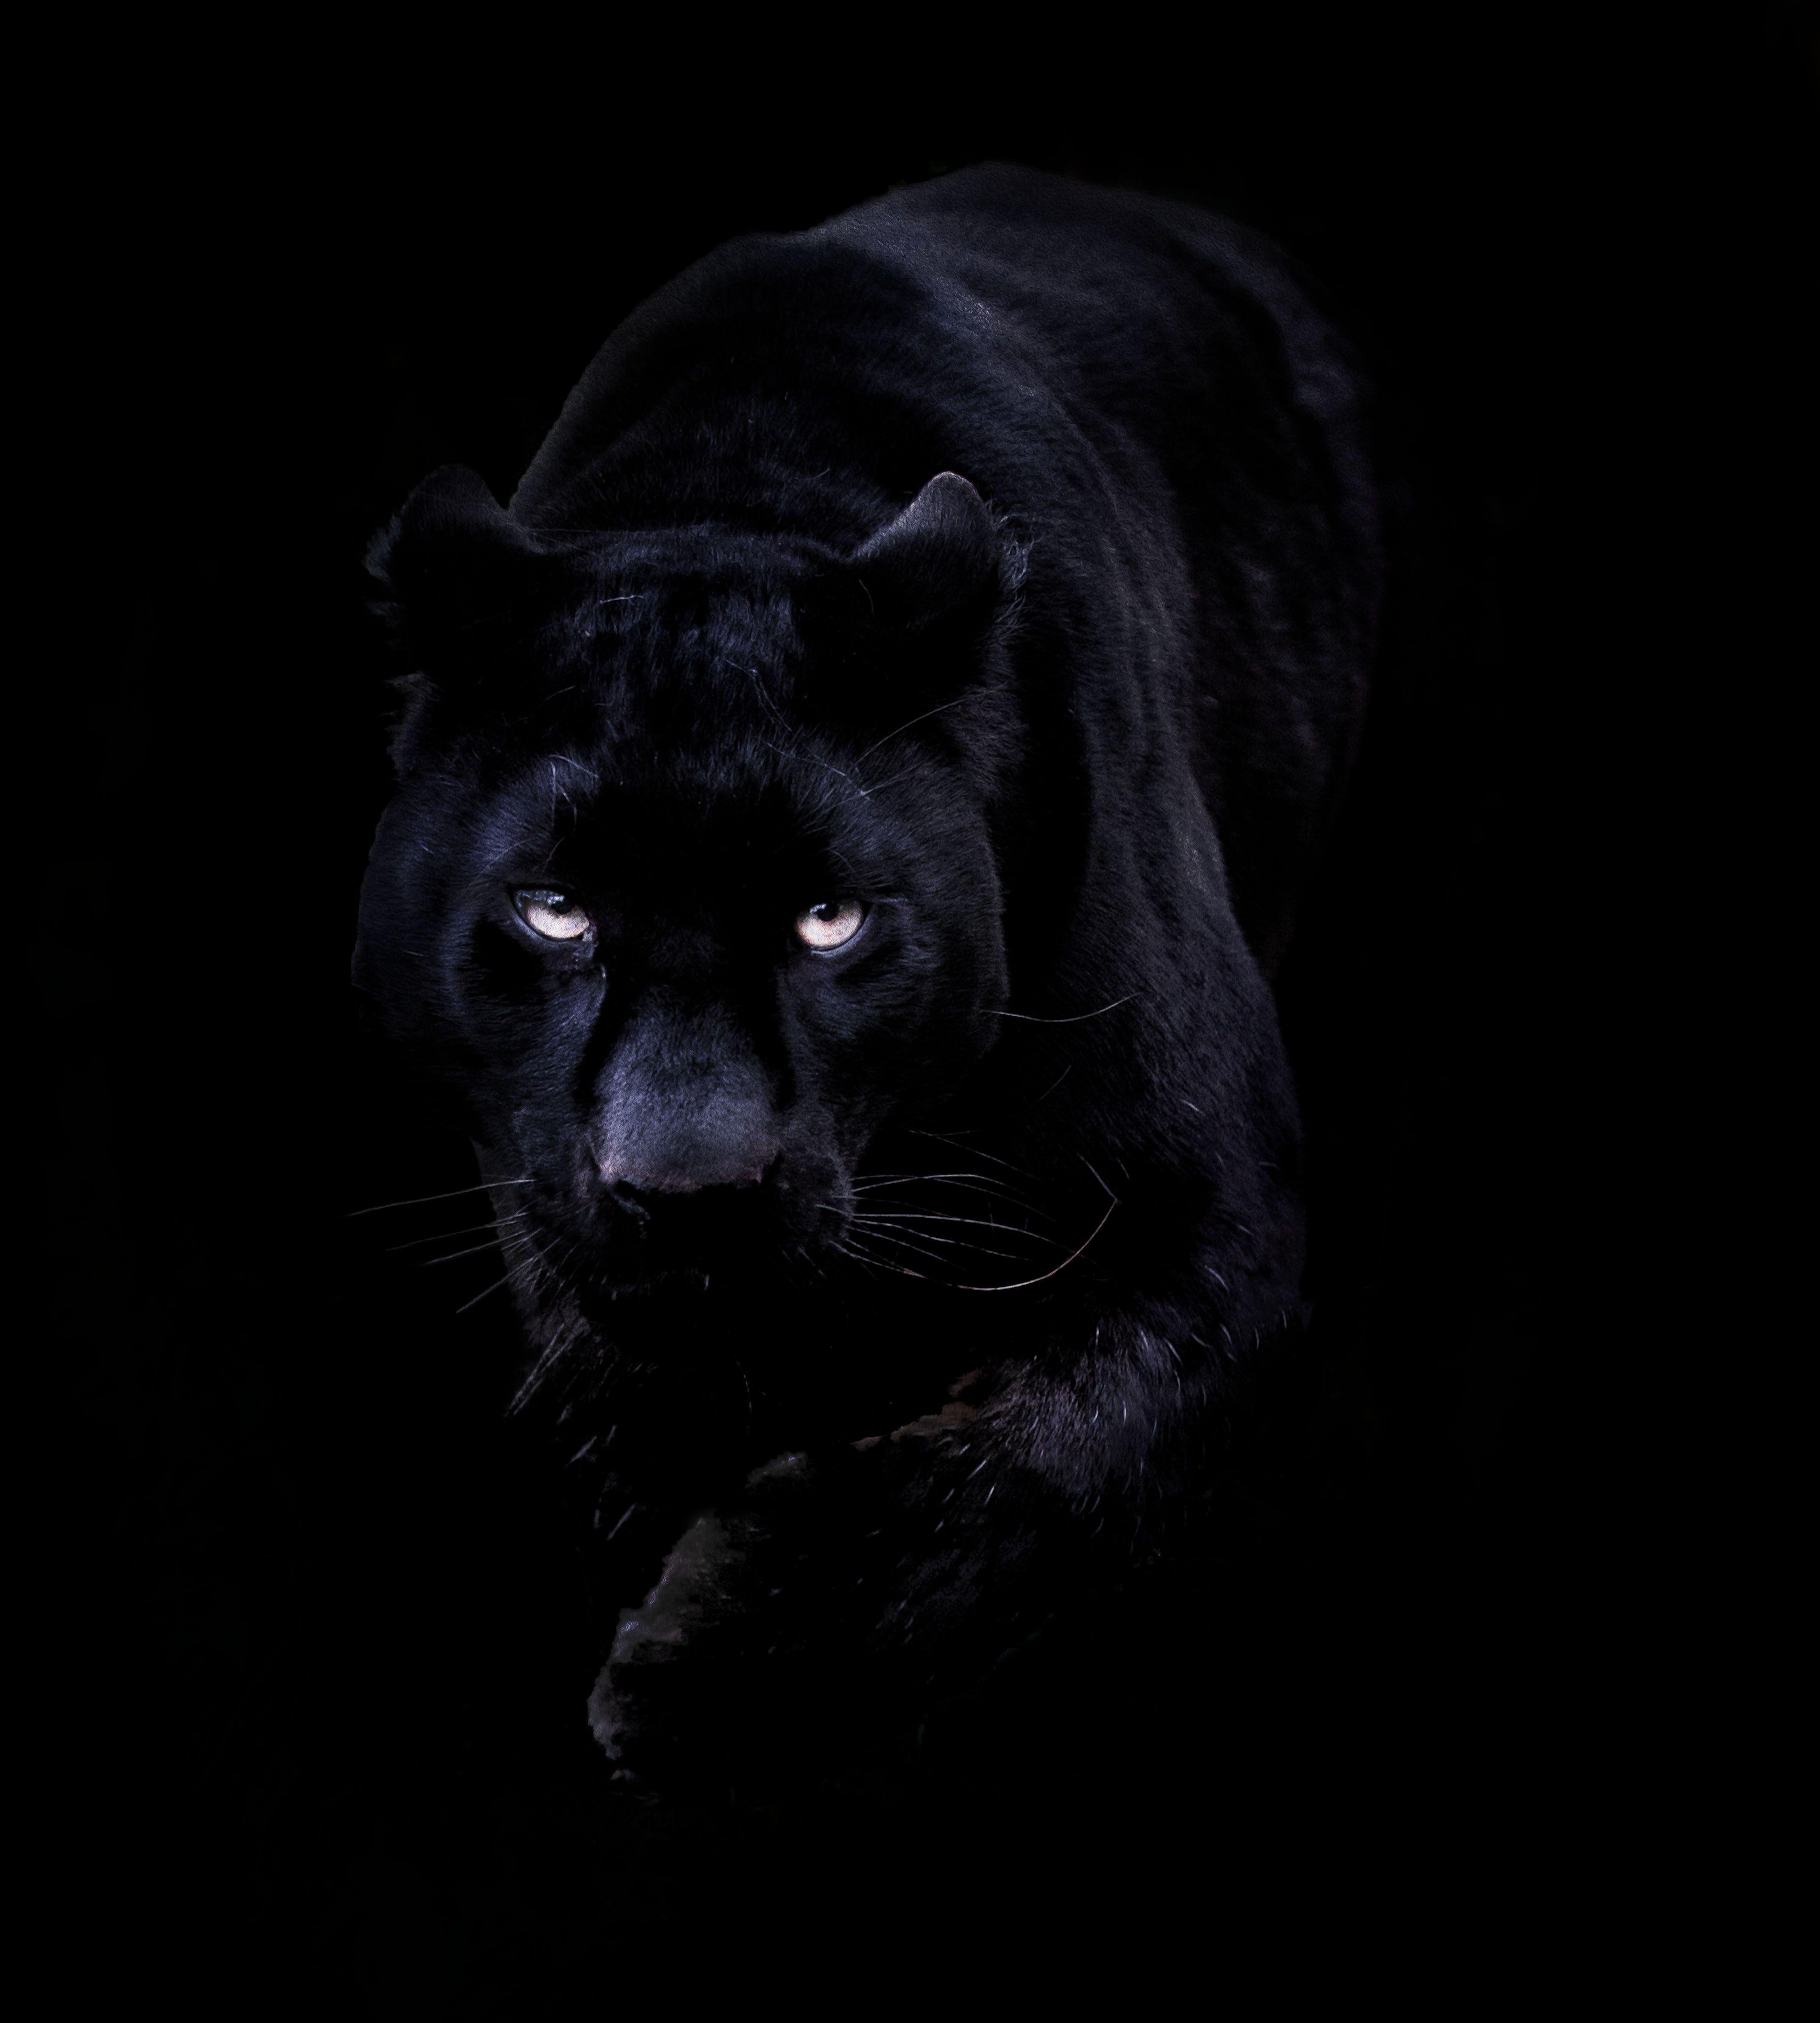 It's in the eyes. Black panther